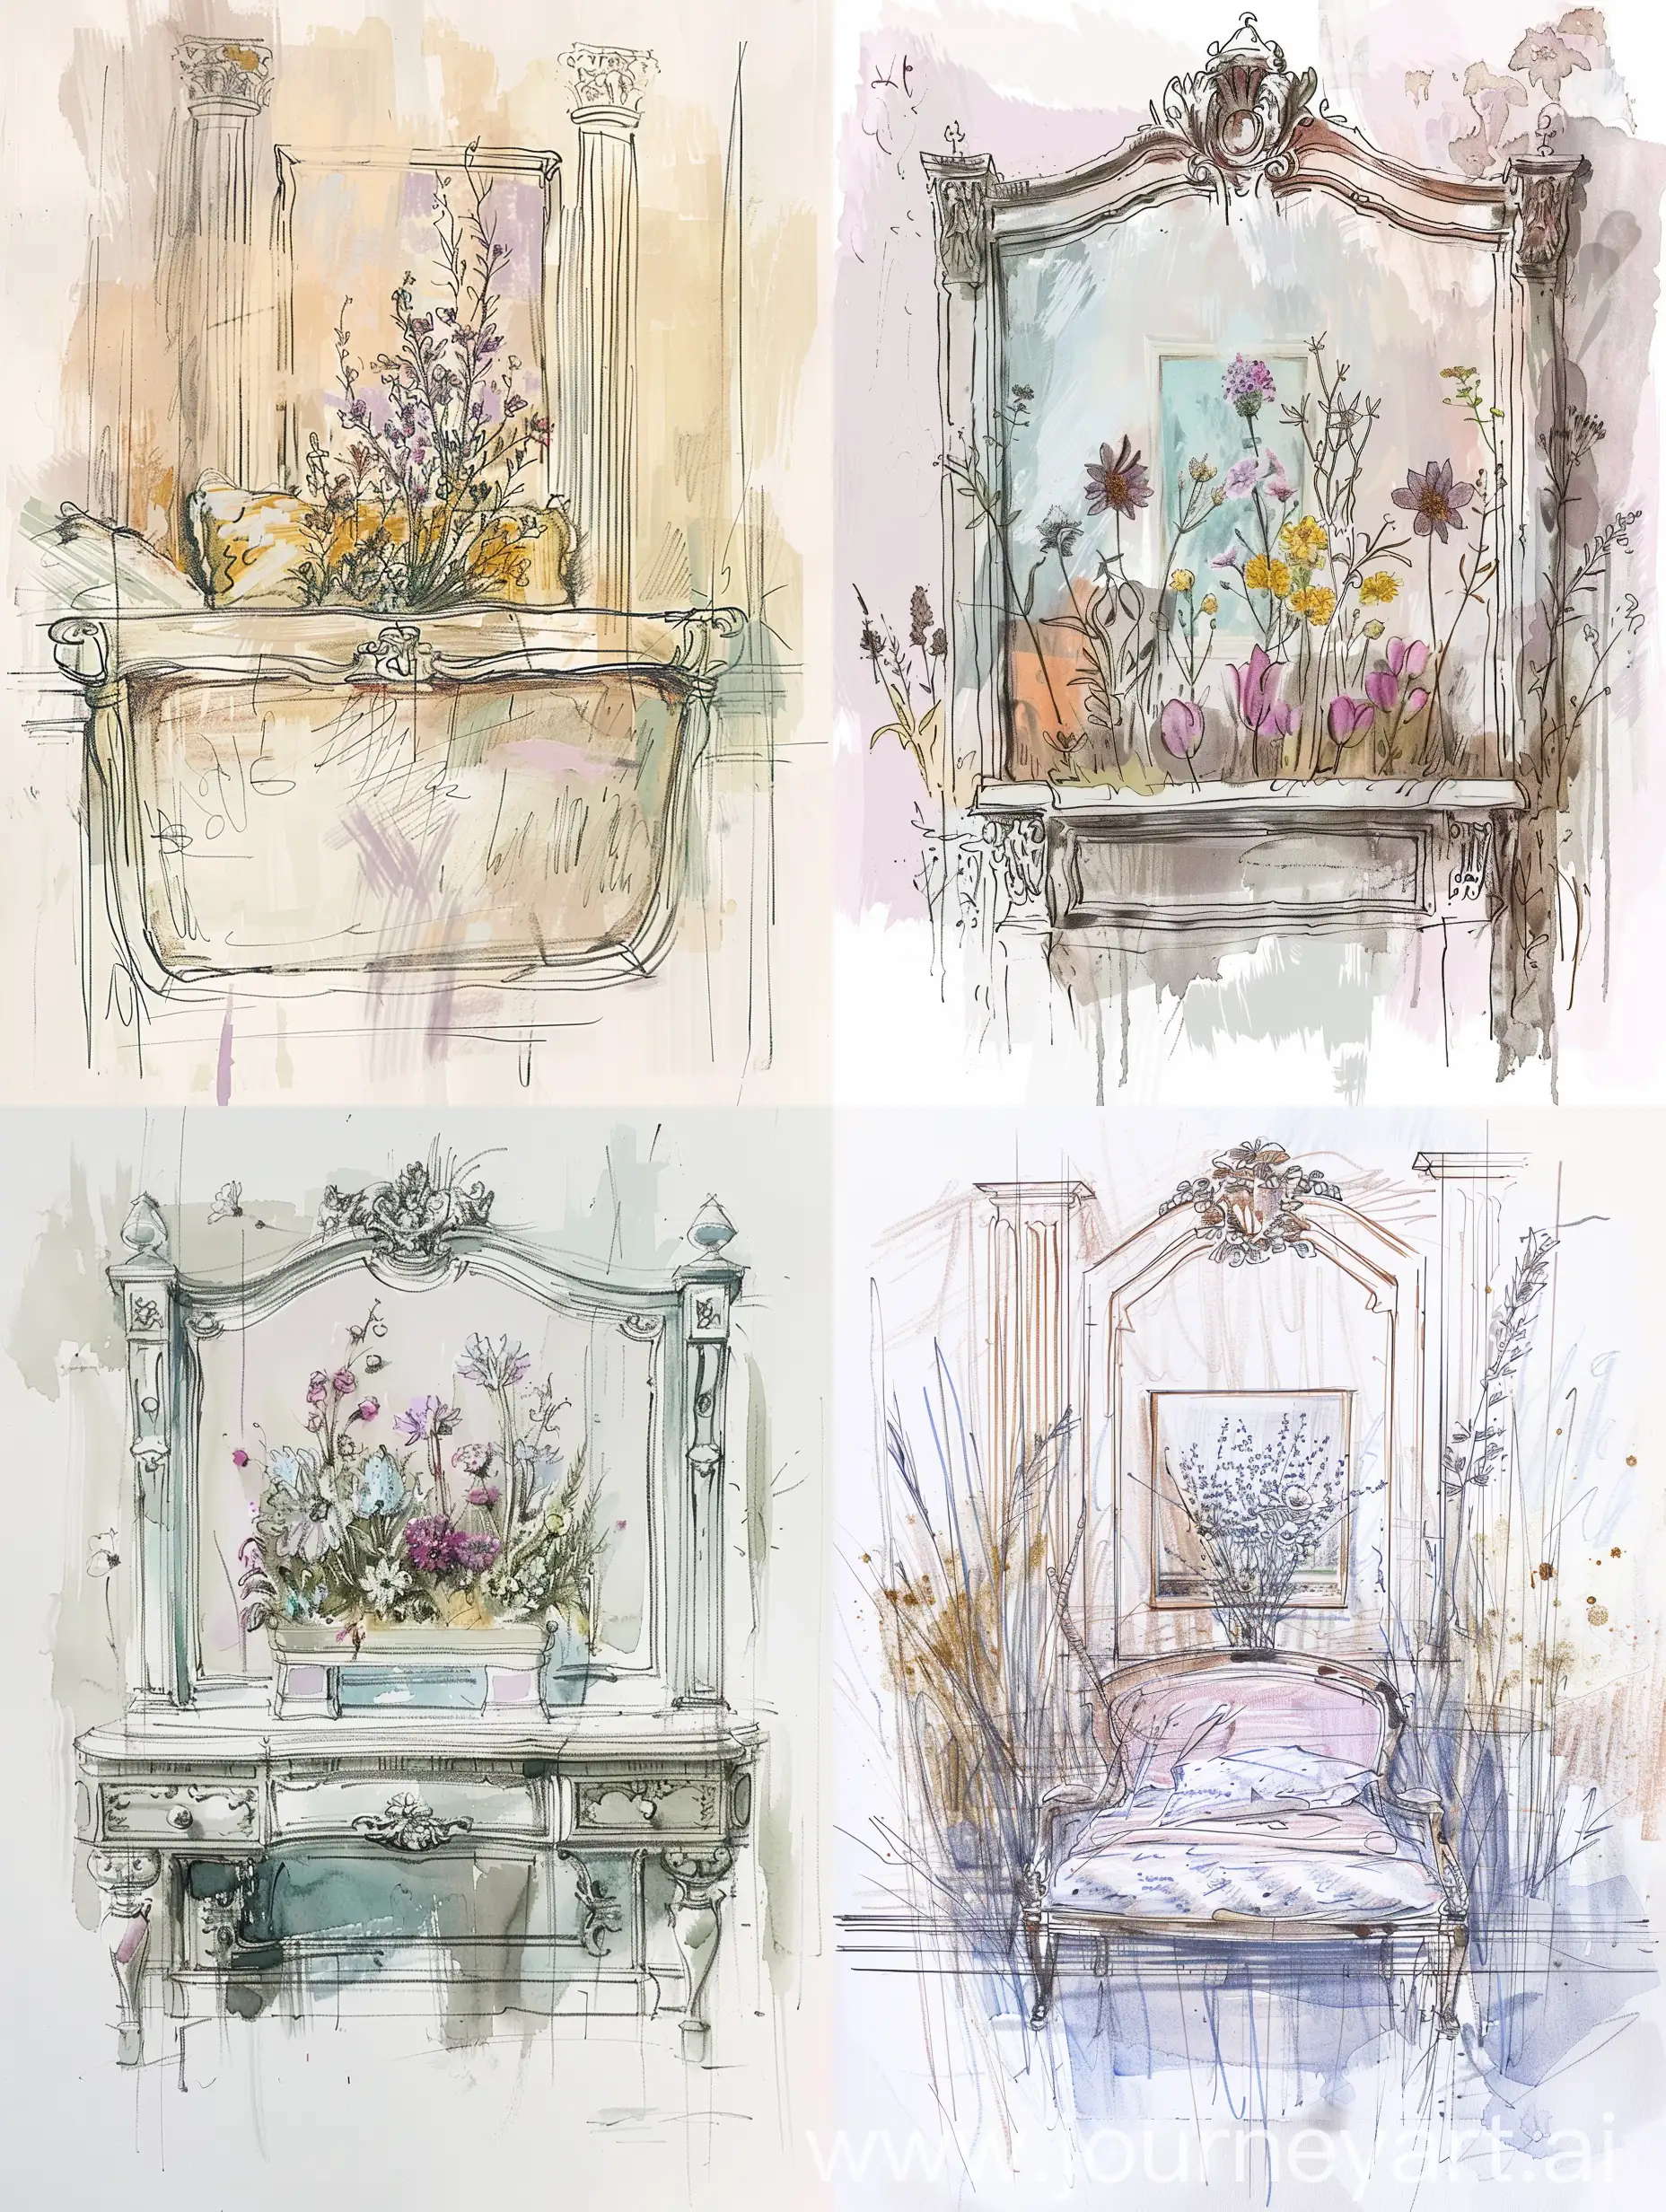 Create a stunning hand-drawn sketch of a antique shabby chic bed in pastel shades. In the center of the headboard there is a painting in the form of wildflowers. Use a mix of soft and strong lines to bring your sketch to life.act as  Philip Starck who was a famous designer